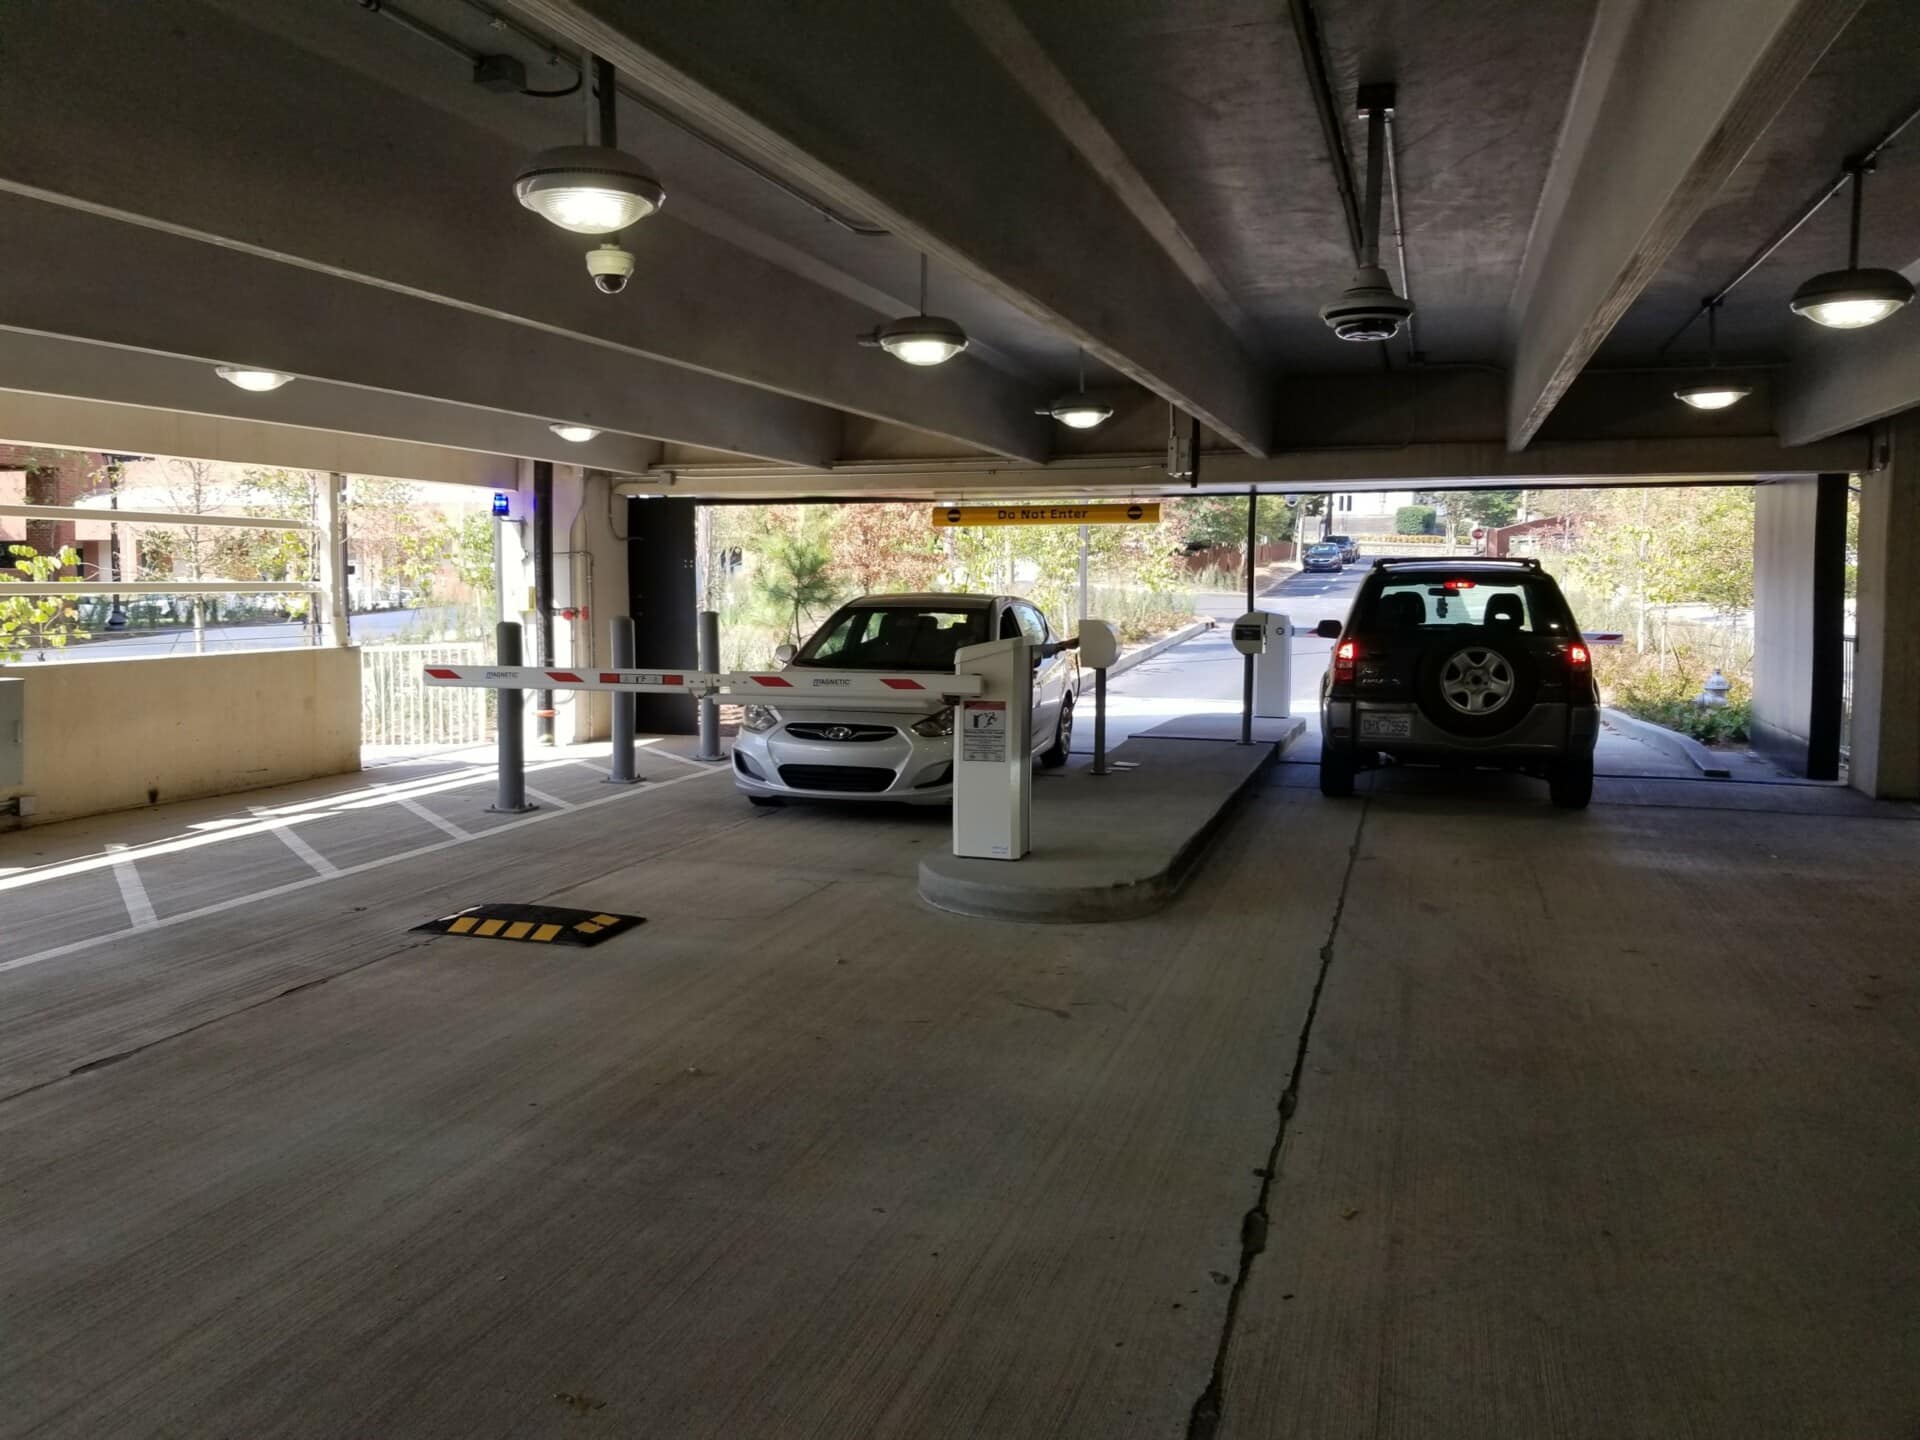 One car enters the gated access parking area and another exits.